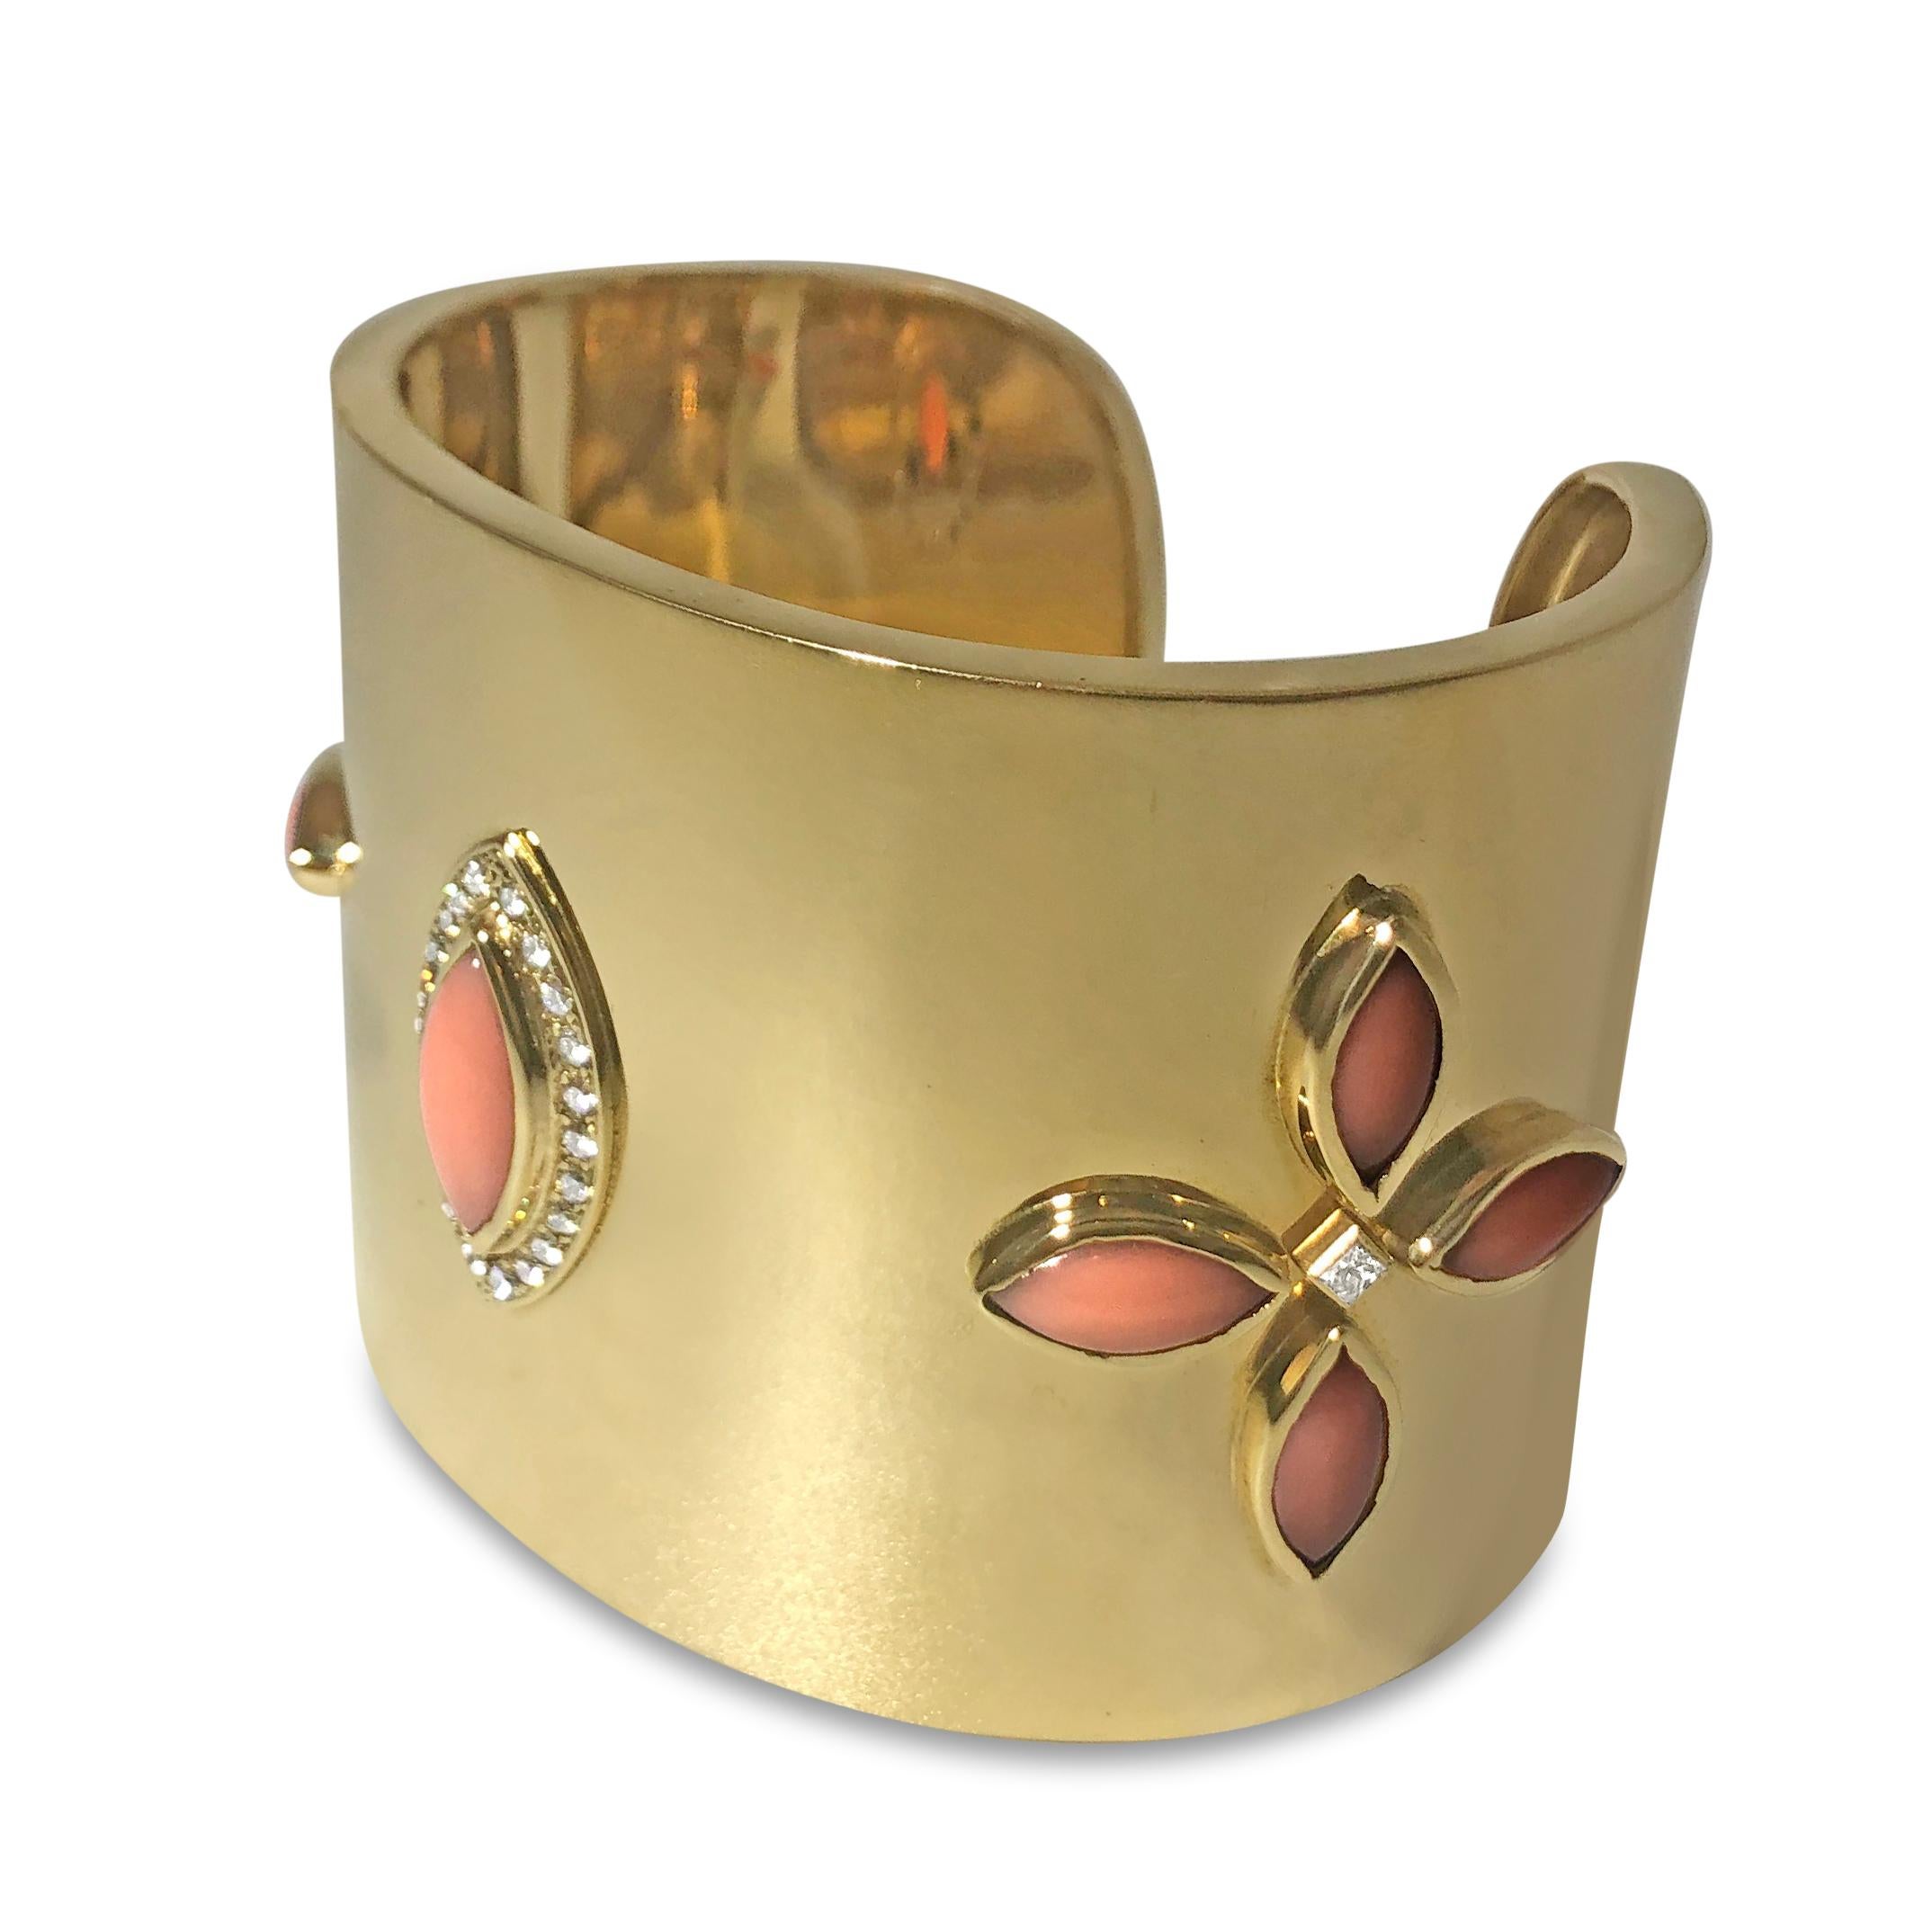 Our statement cuff will wow you and everyone else who sees it! This slip-on 2 inch cuff bracelet features high shine 14K yellow gold with 24 round 1.6mm and 2.4mm white diamonds, totaling 0.60ct, and 9 pristine coral cabochons.

Specifications:
-